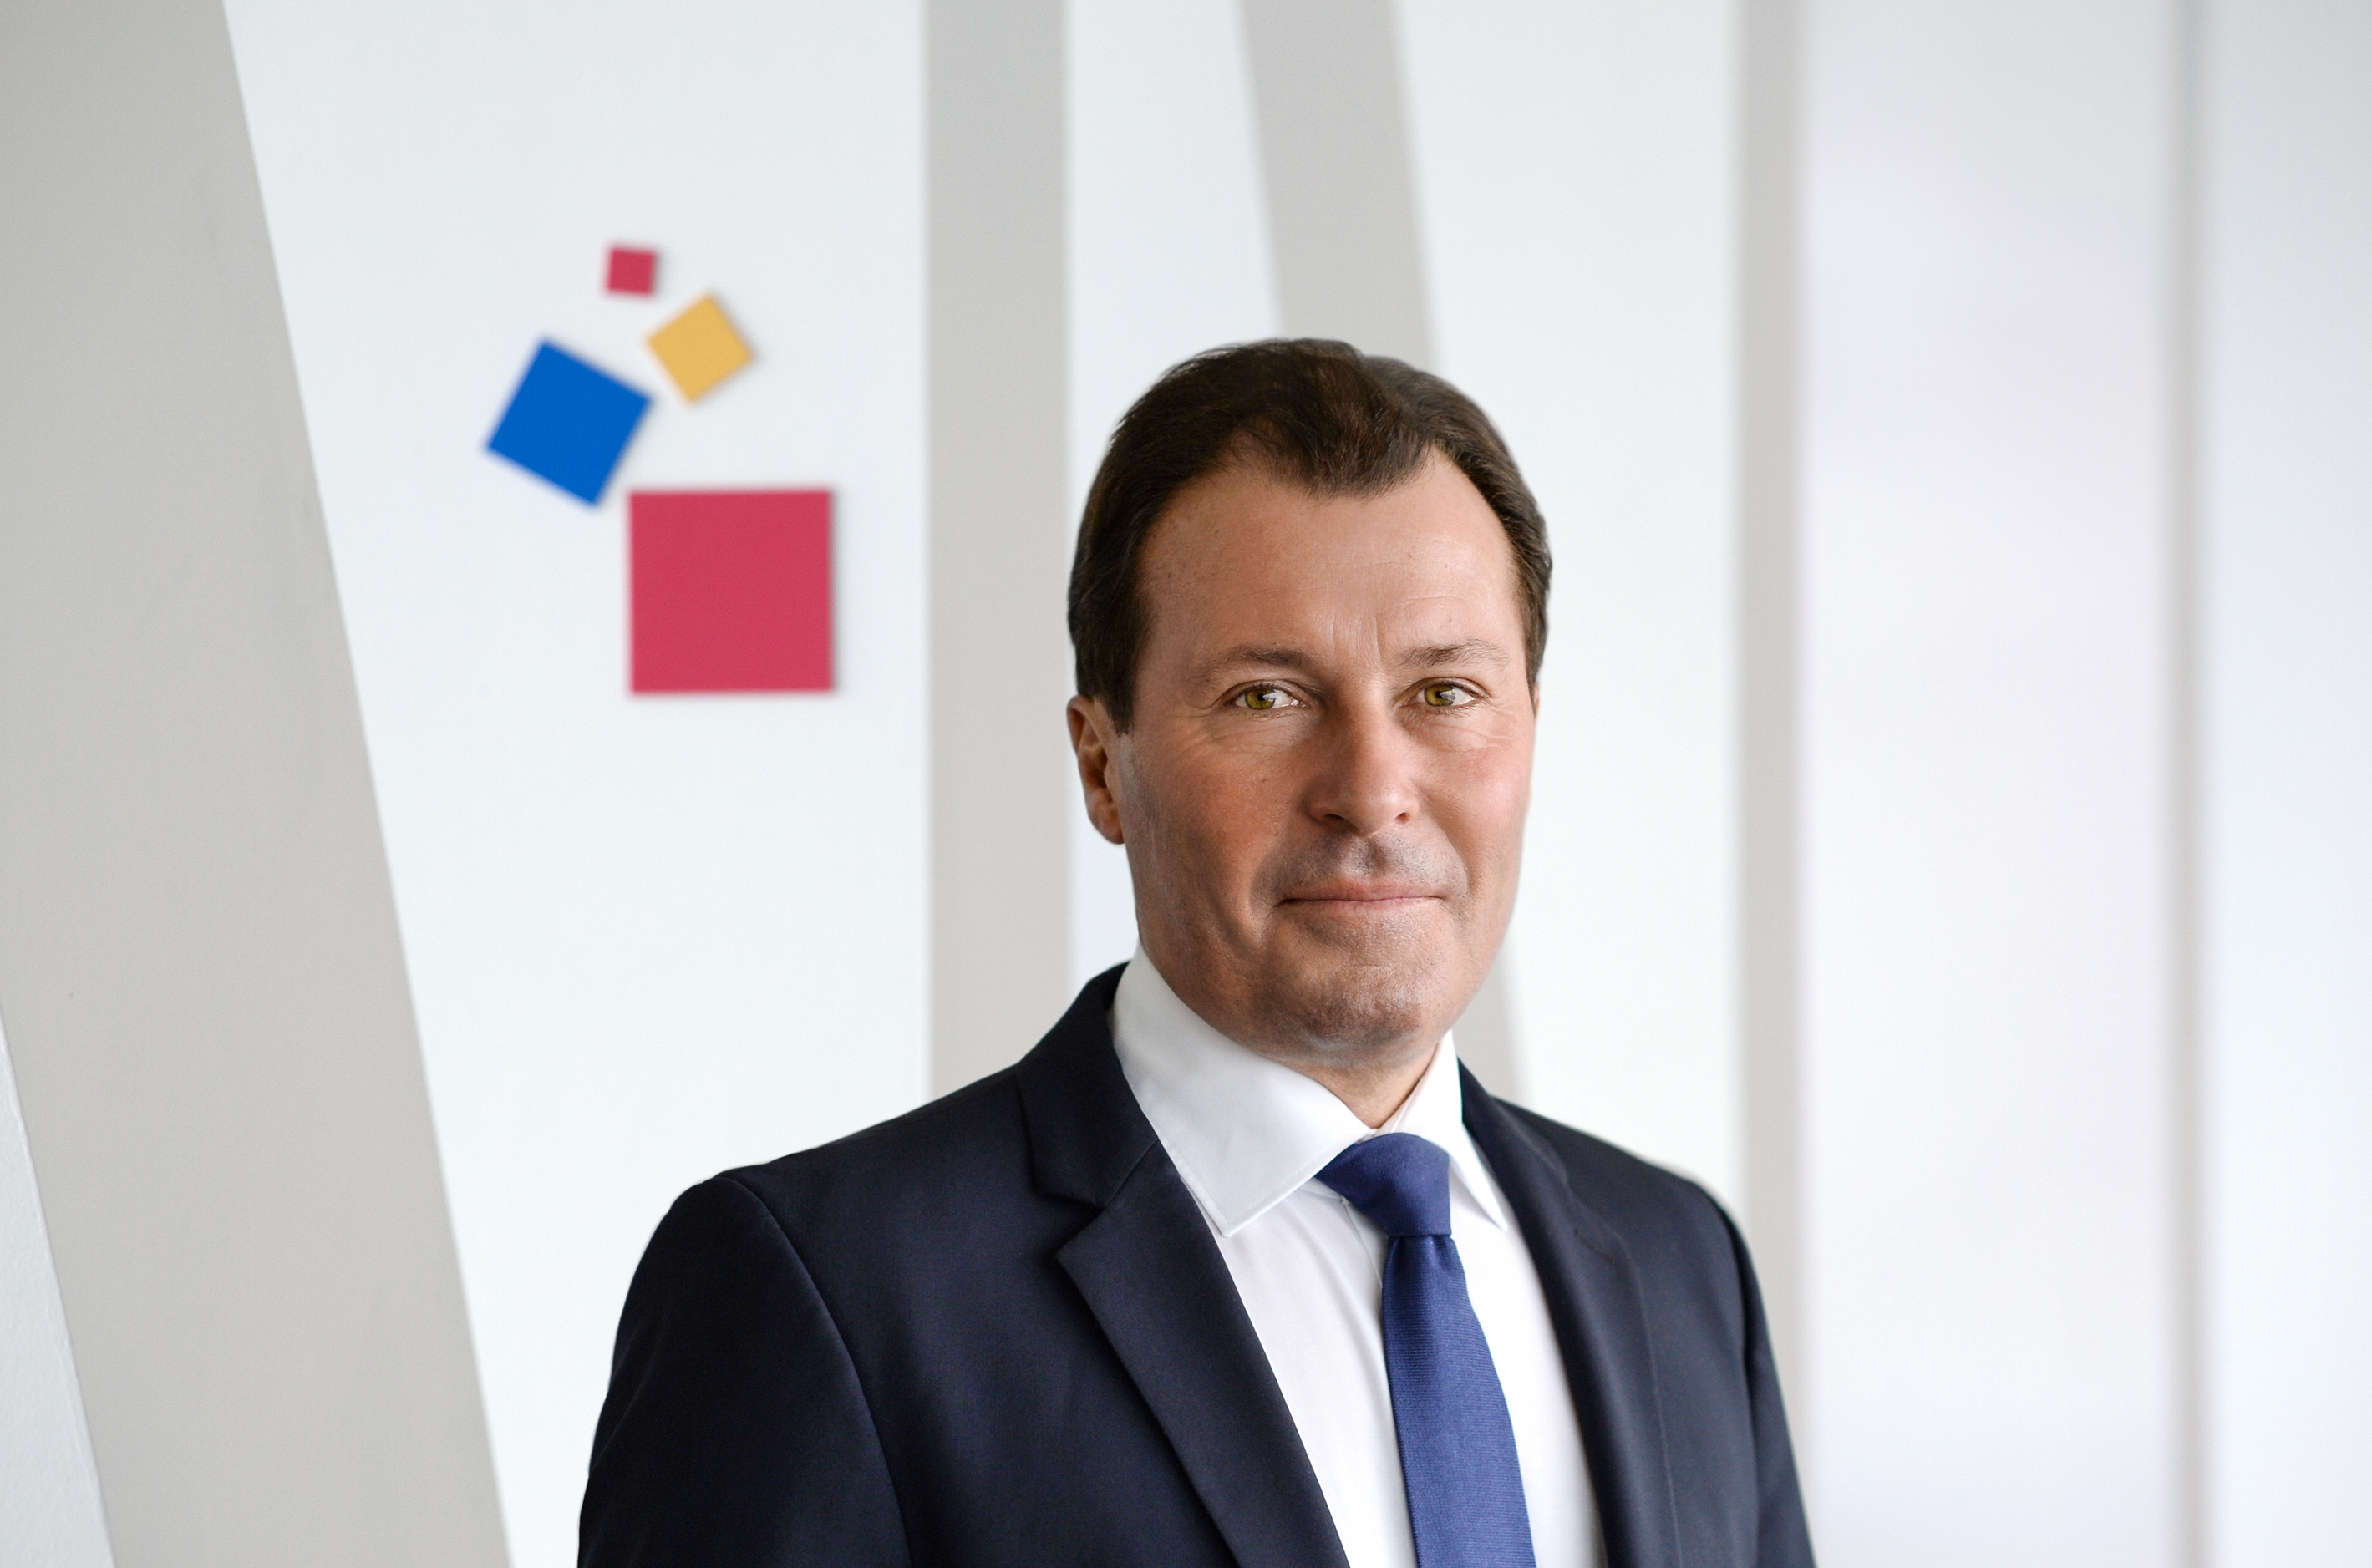 Wolfgang Marzin, President and Chief Executive Officer (CEO) of Messe Frankfurt GmbH